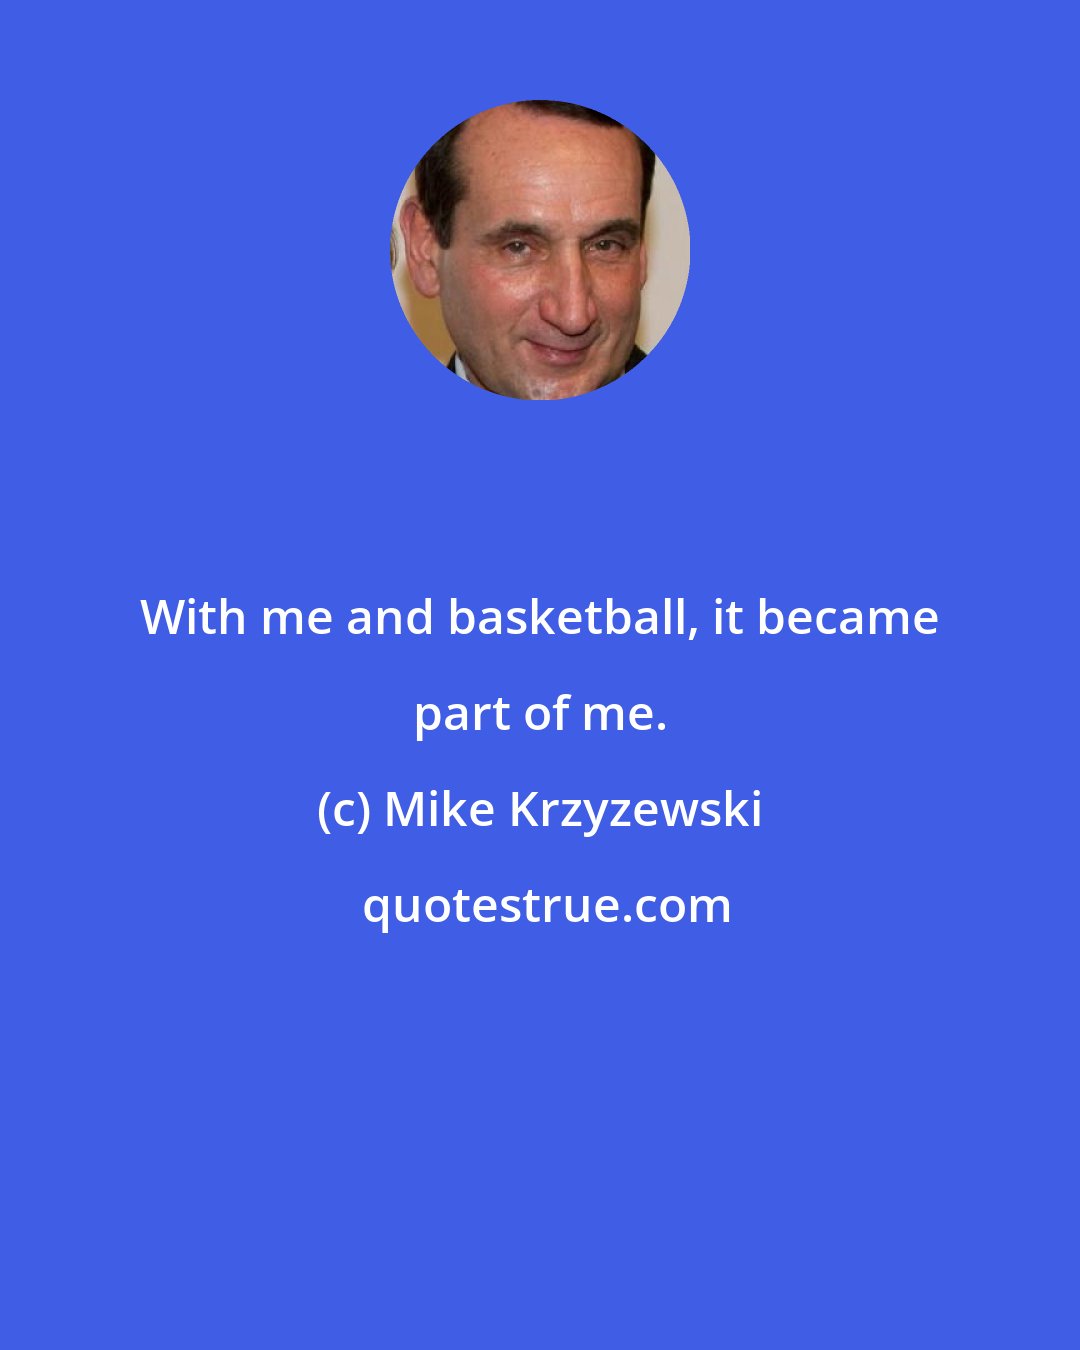 Mike Krzyzewski: With me and basketball, it became part of me.